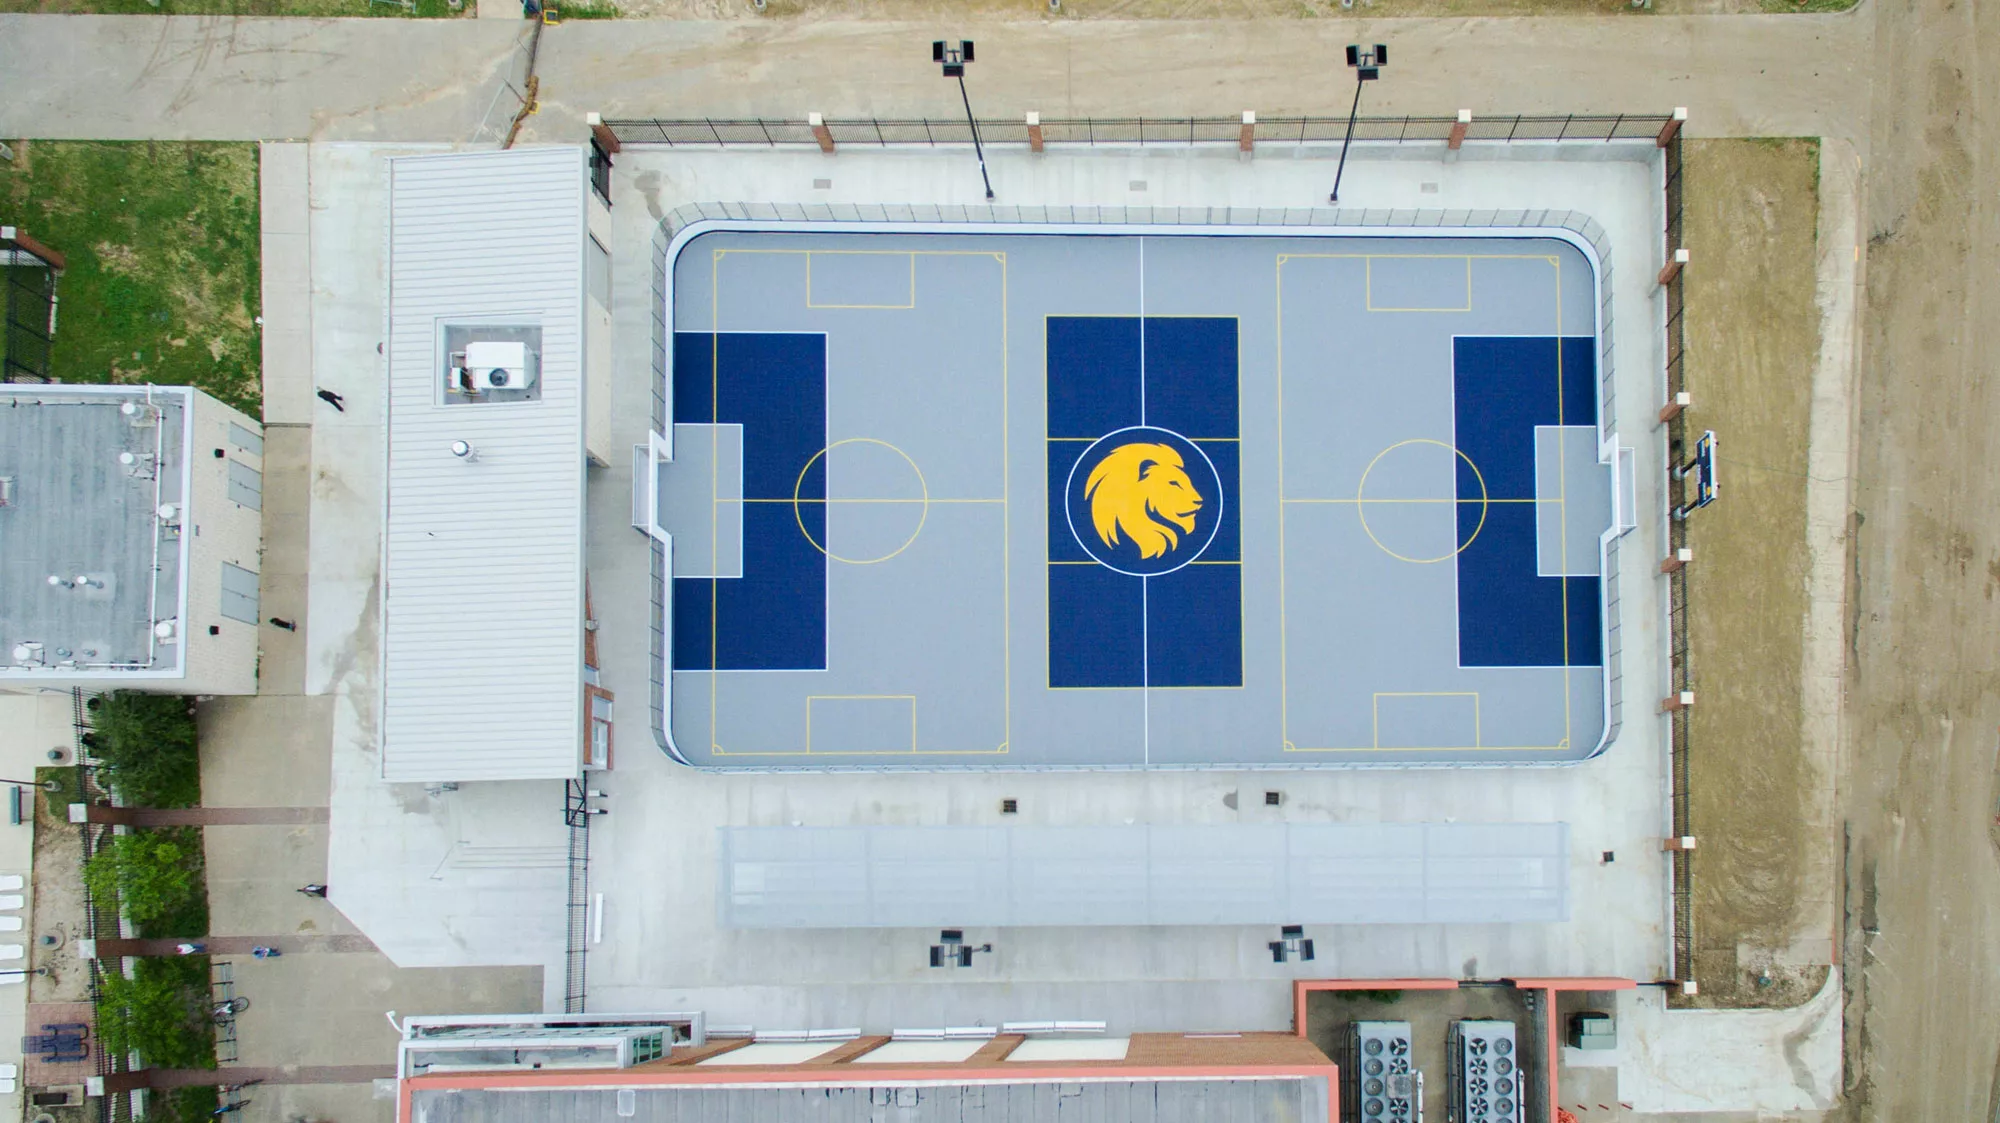 Texas A&M University-Commerce, Texas Mac Court sports court flooring is a polymer tile, has dasher boards and rink dividers completed using our construction manager at risk delivery method.